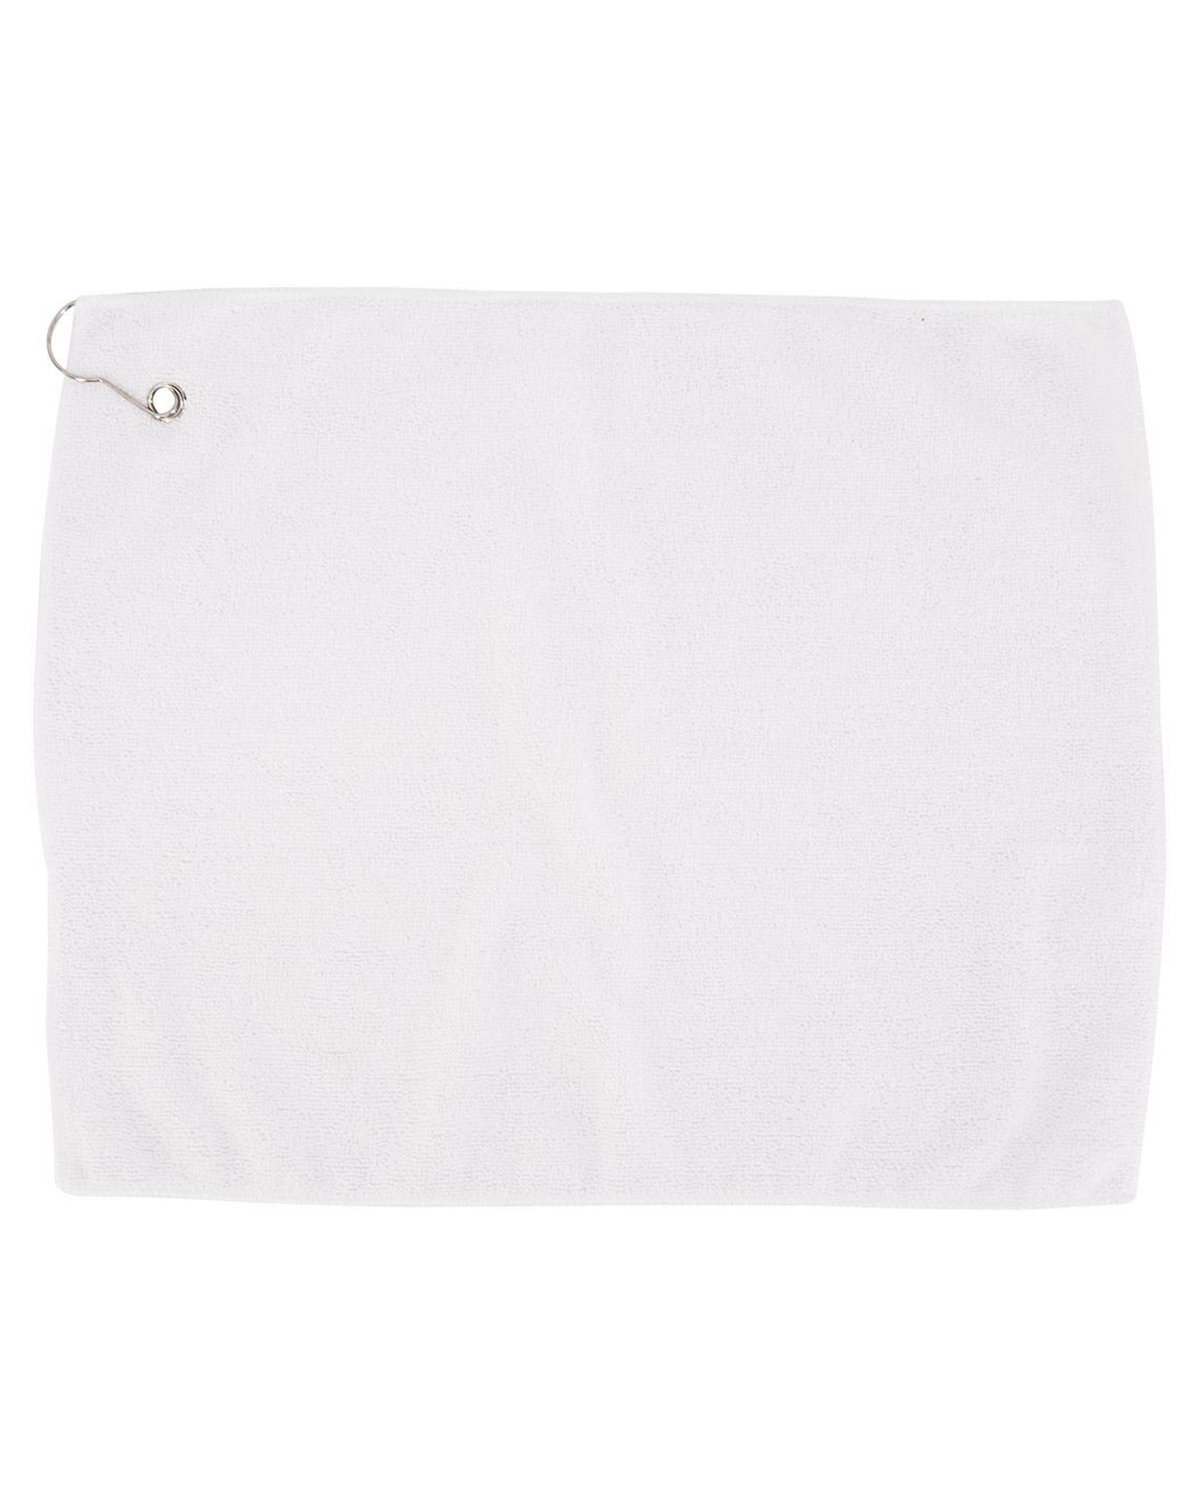 Microfiber Towel With Grommet And Hook-Carmel Towel Company